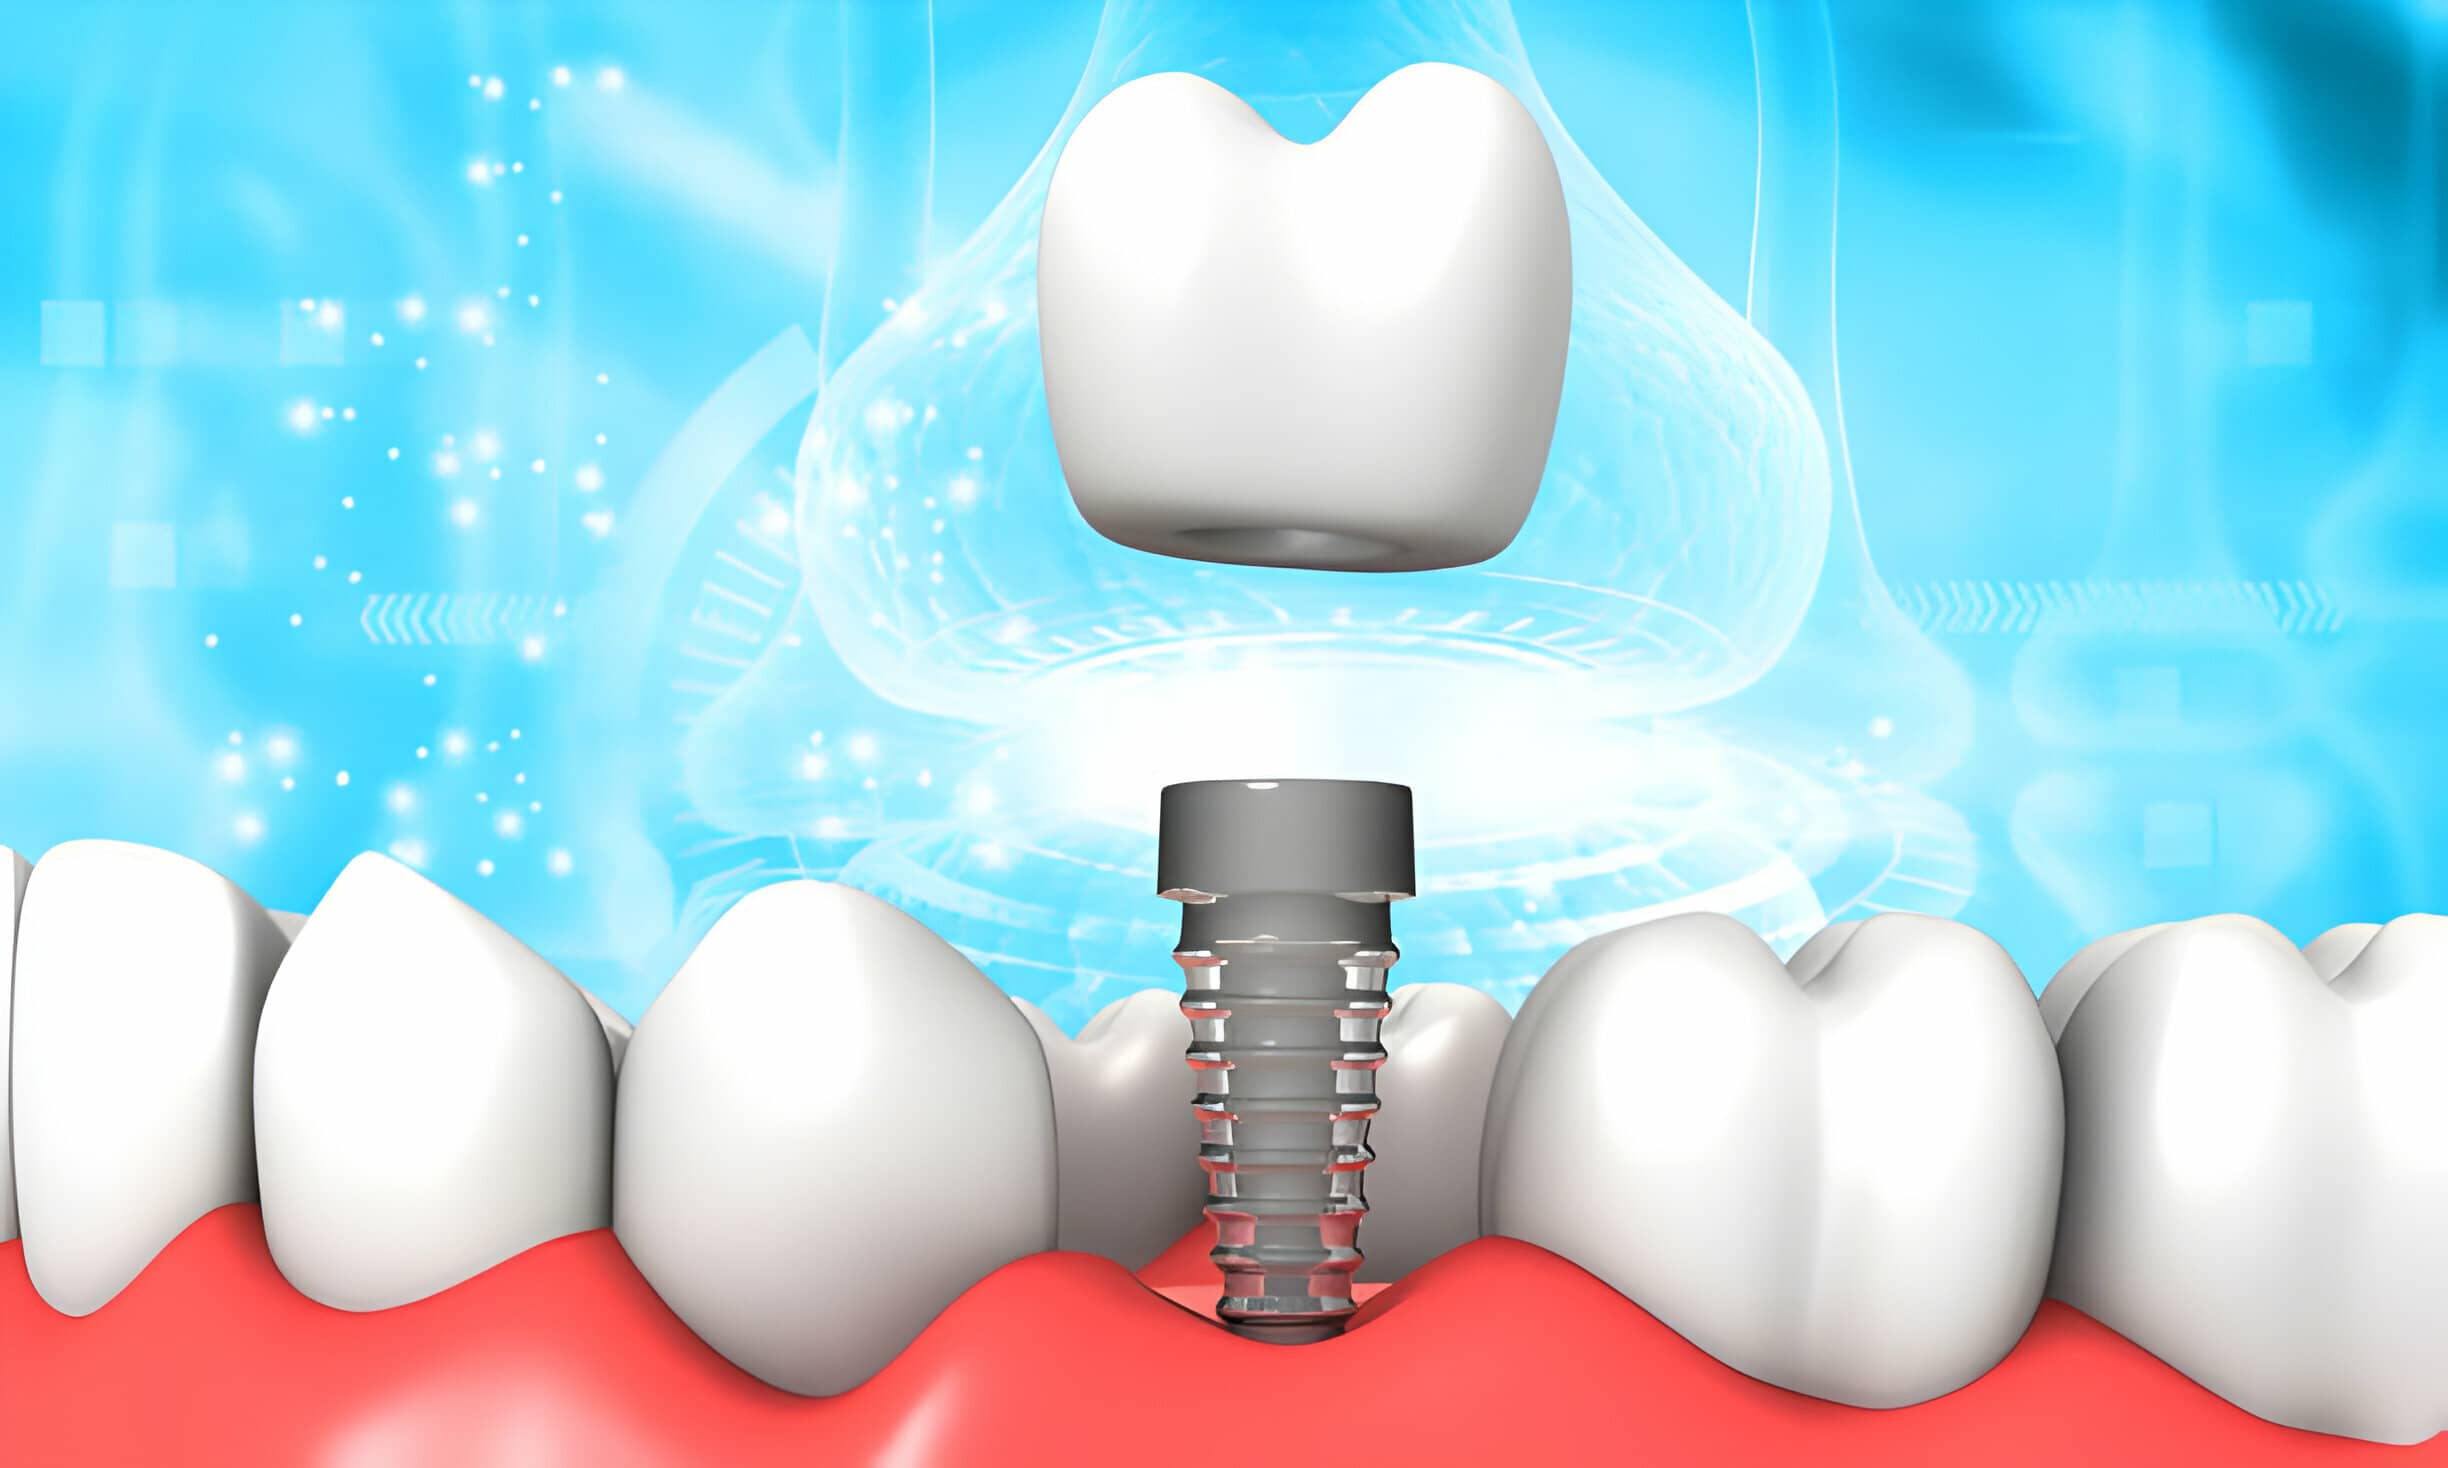 Are Dental Implants The Best Option For A Natural-Looking Smile?